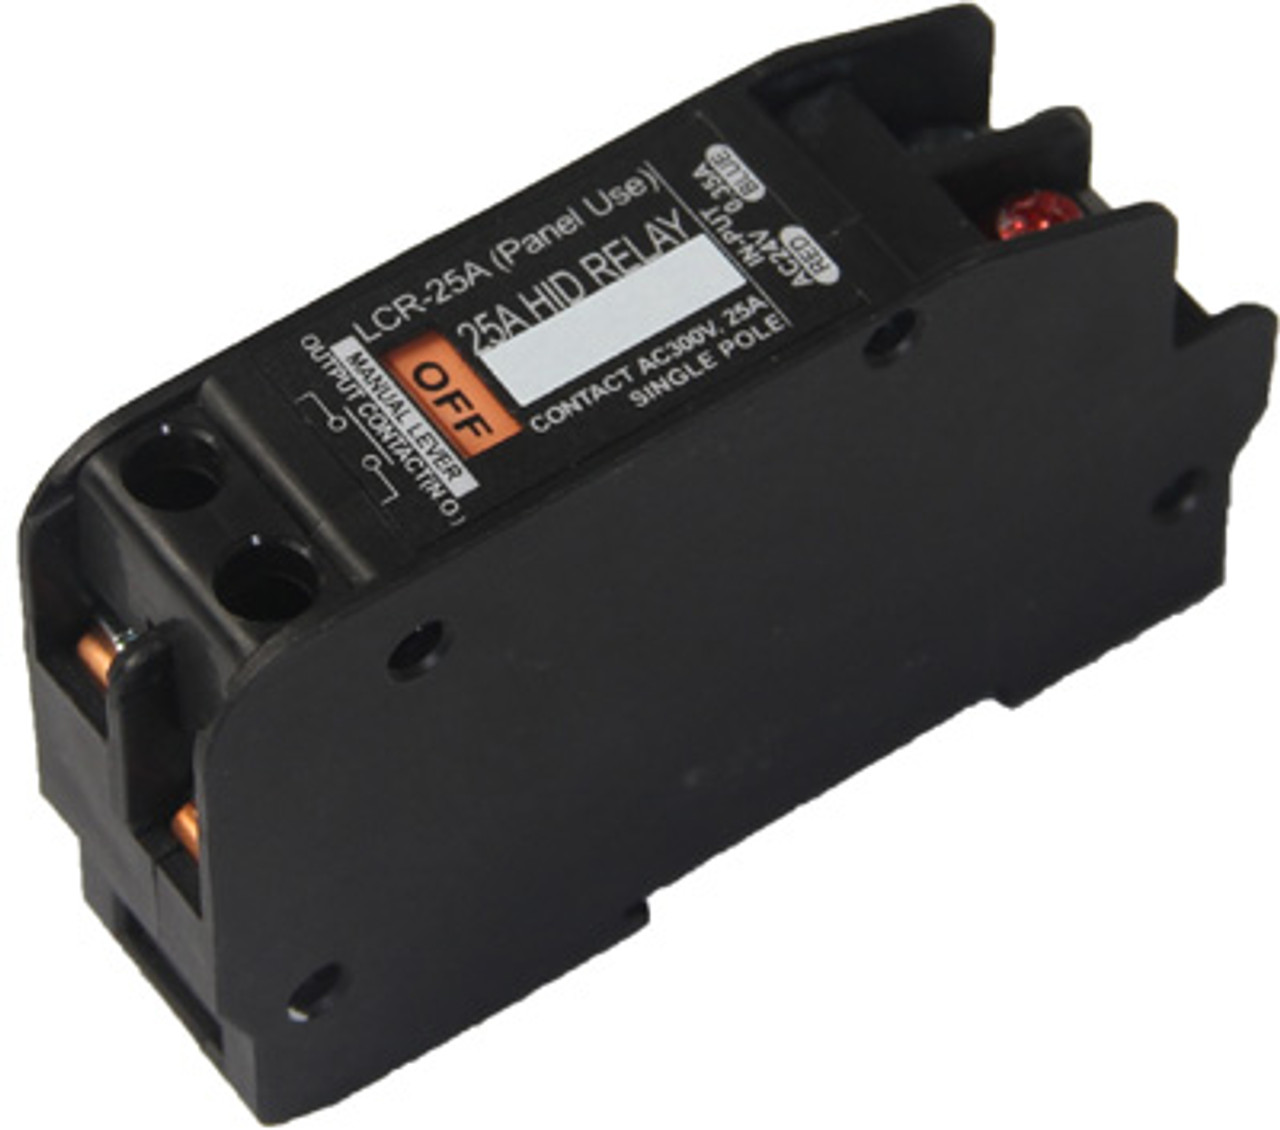 Temco Controls  LCR-25A HID Lighting Control Relay